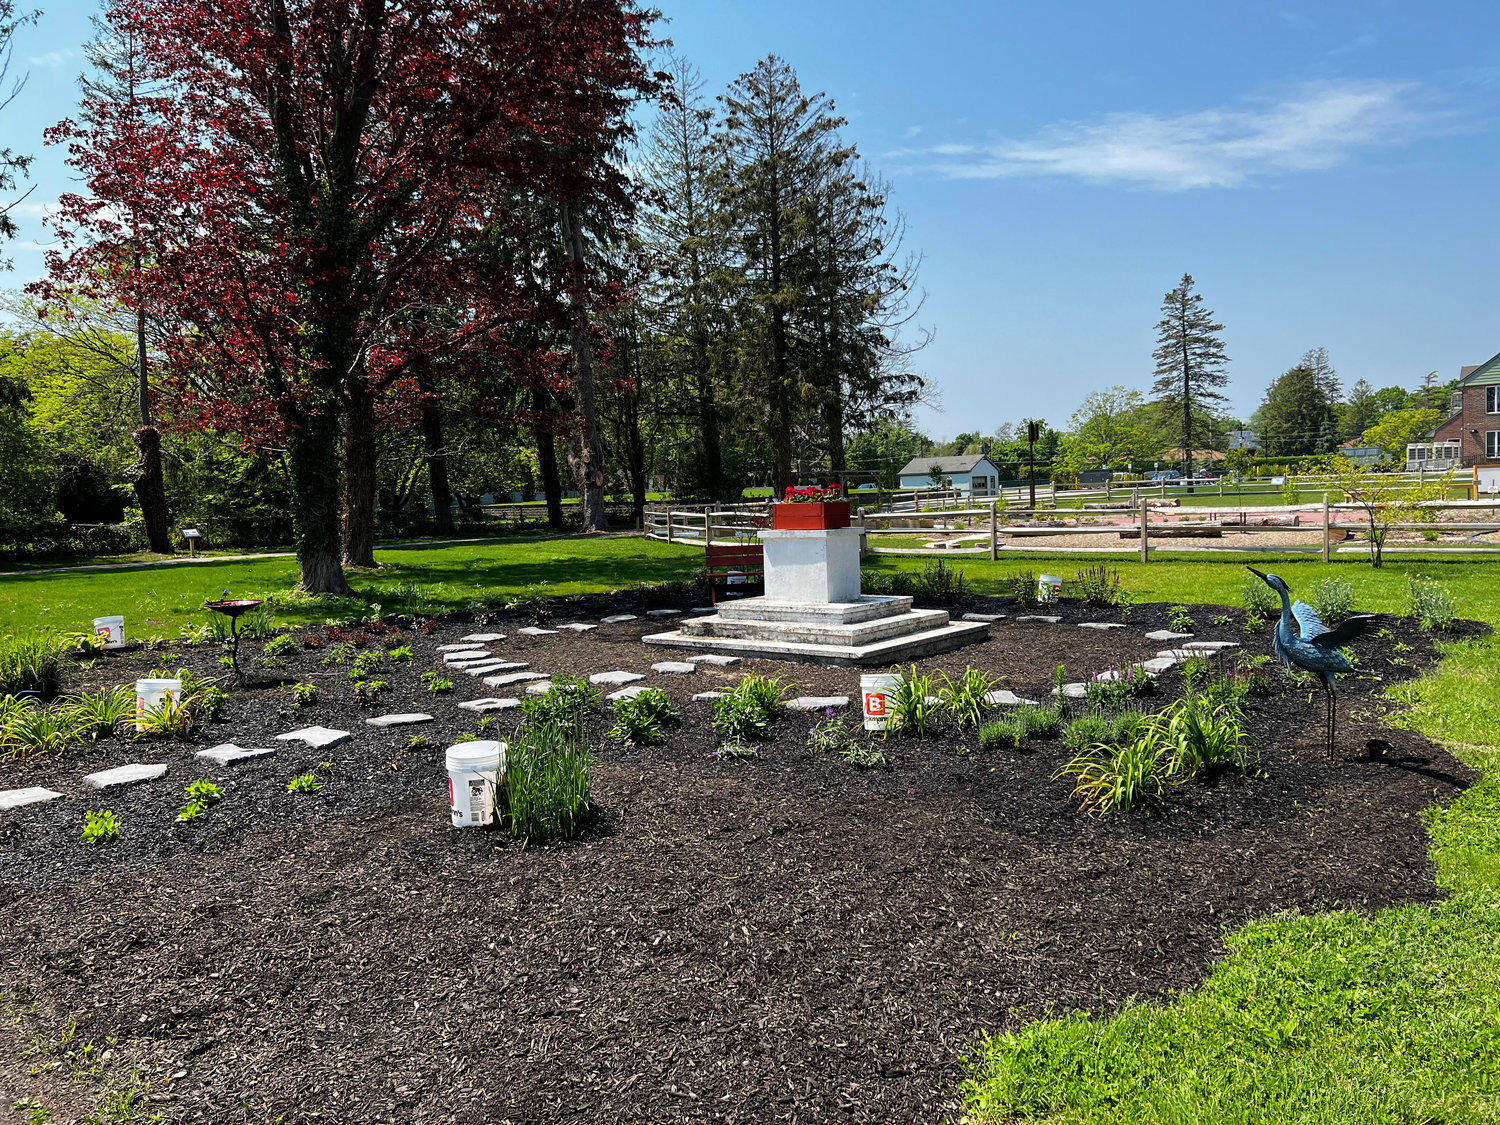 Bayport Flower Houses helped Nasca select native plants and butterfly-conducive species for his Eagle Scout project.